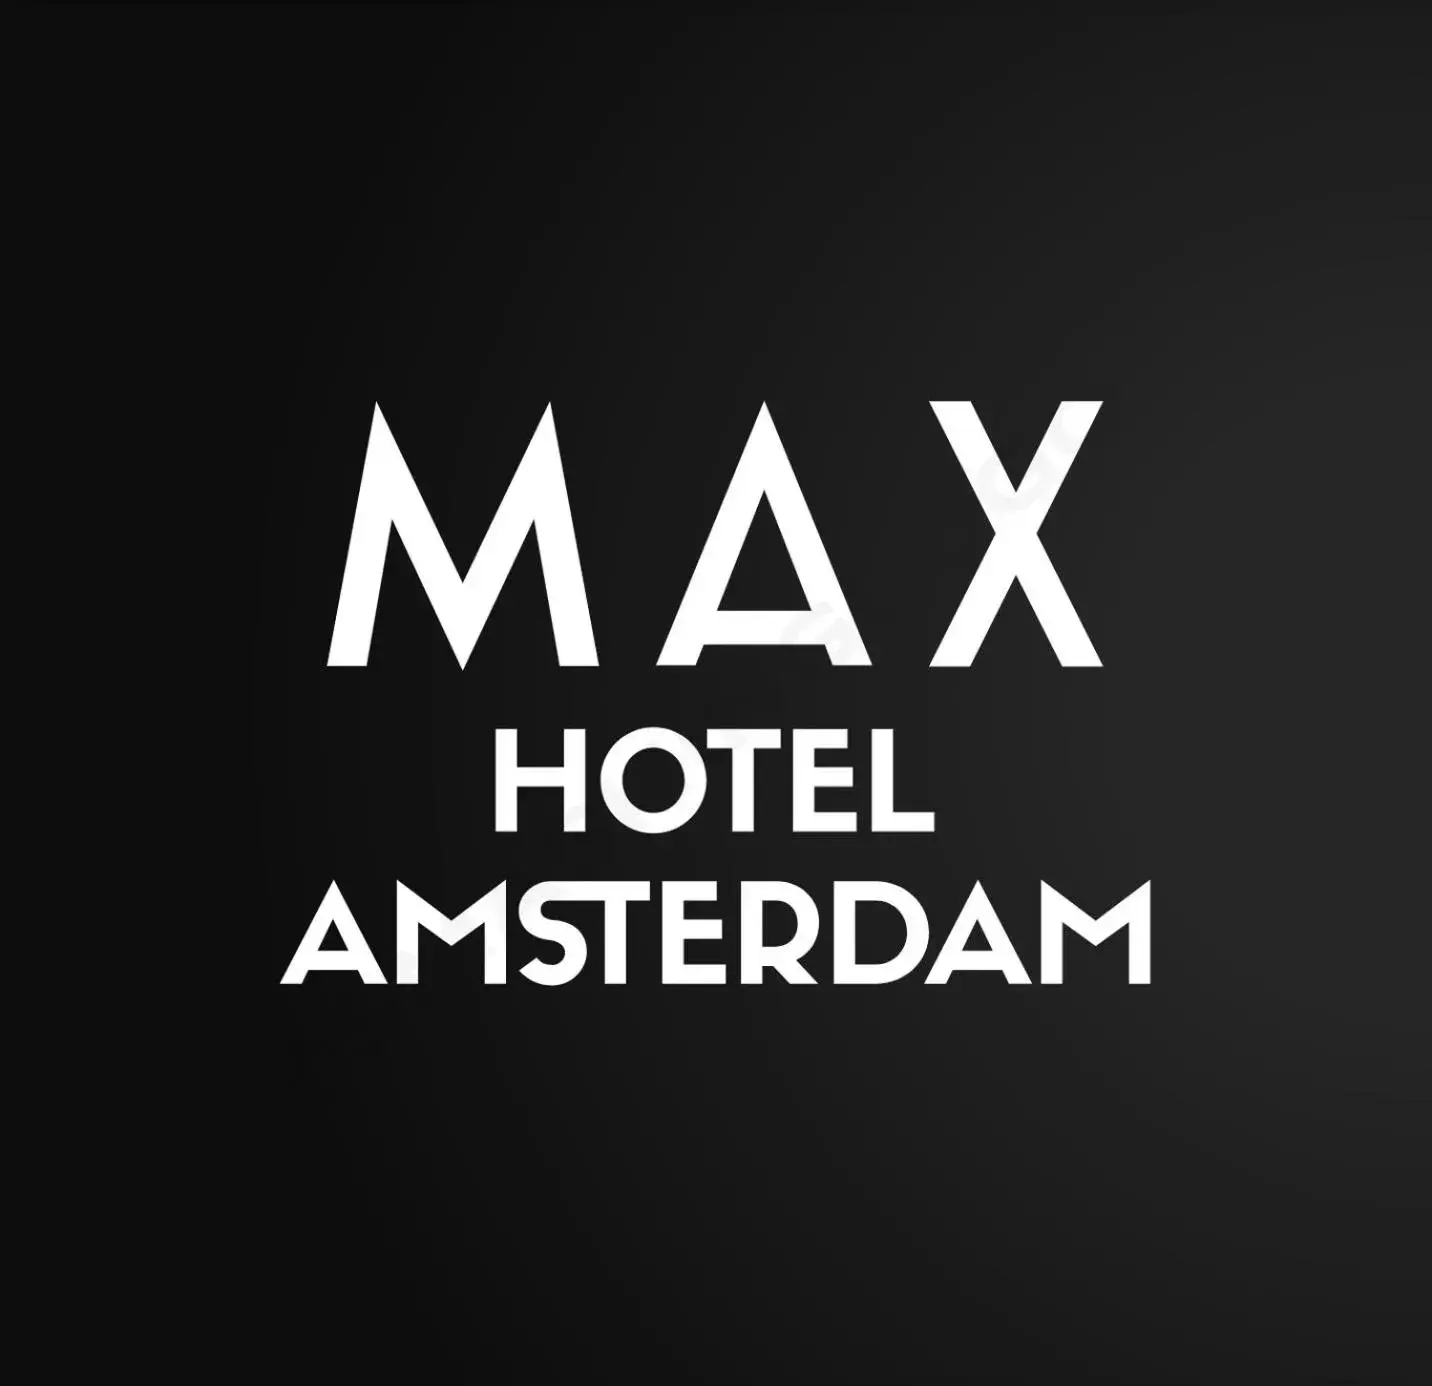 Property logo or sign in MAX Hotel Amsterdam